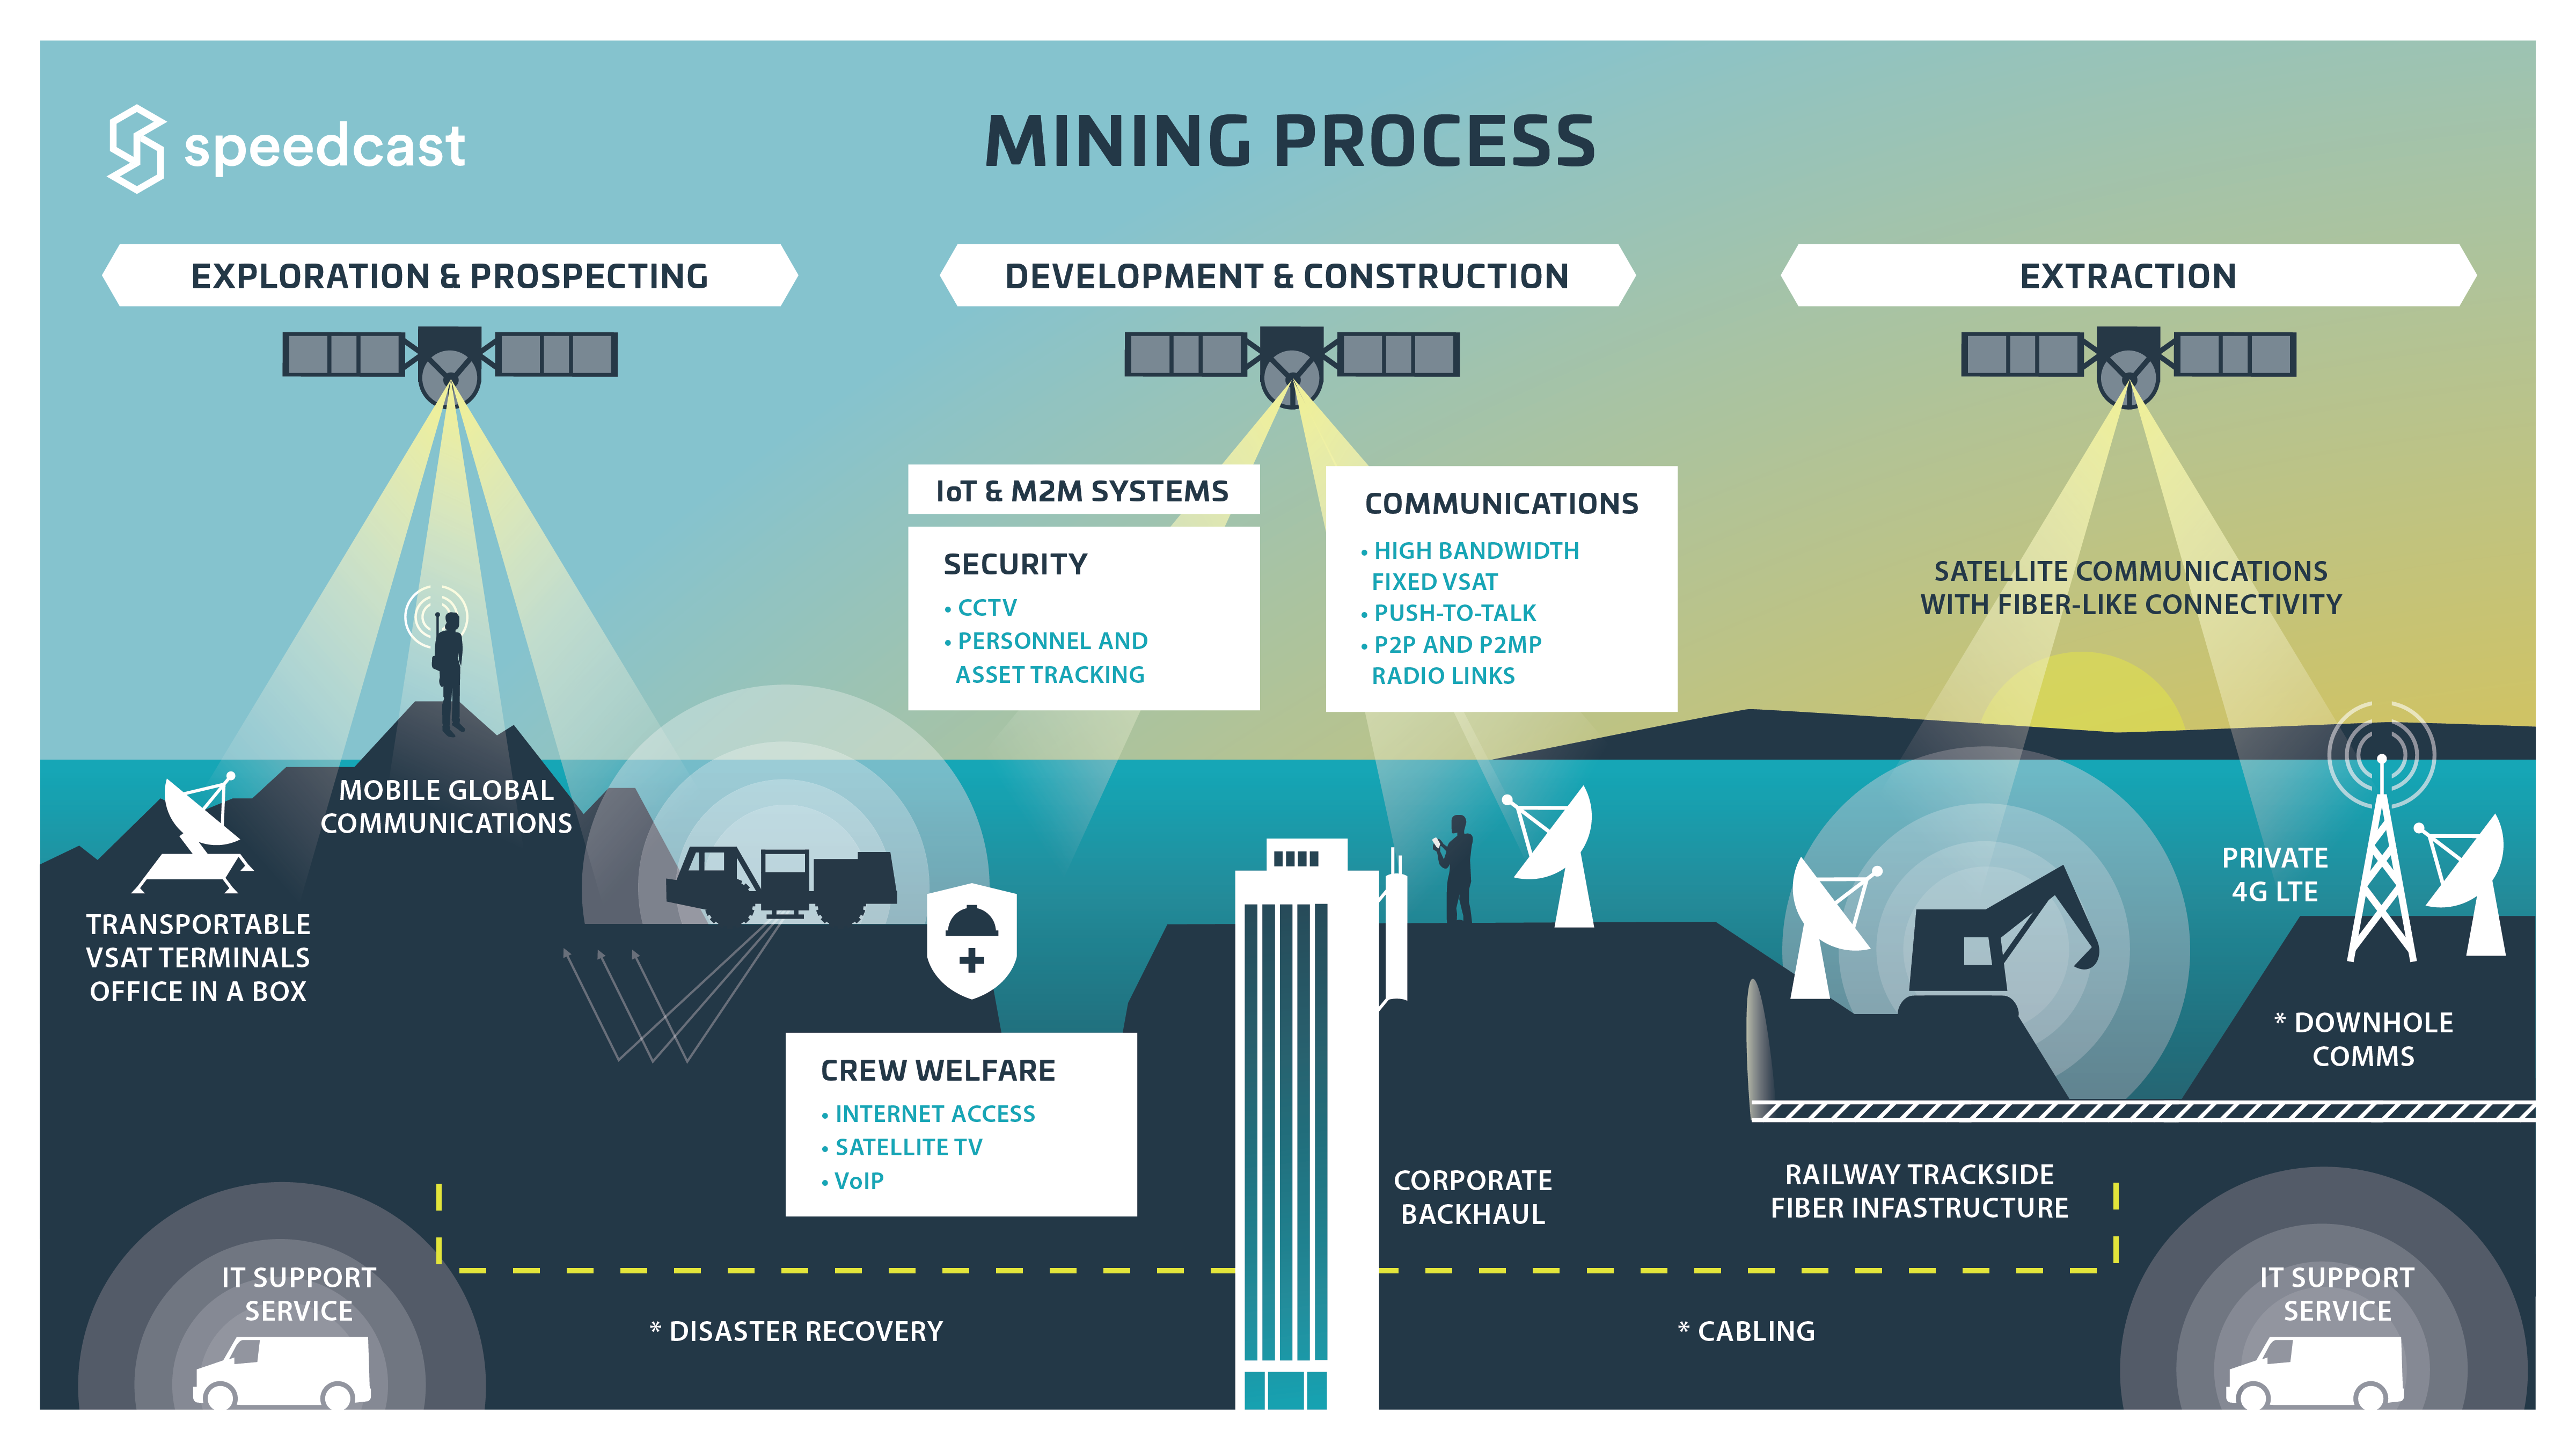 groundwater problems related to mining bitcoins